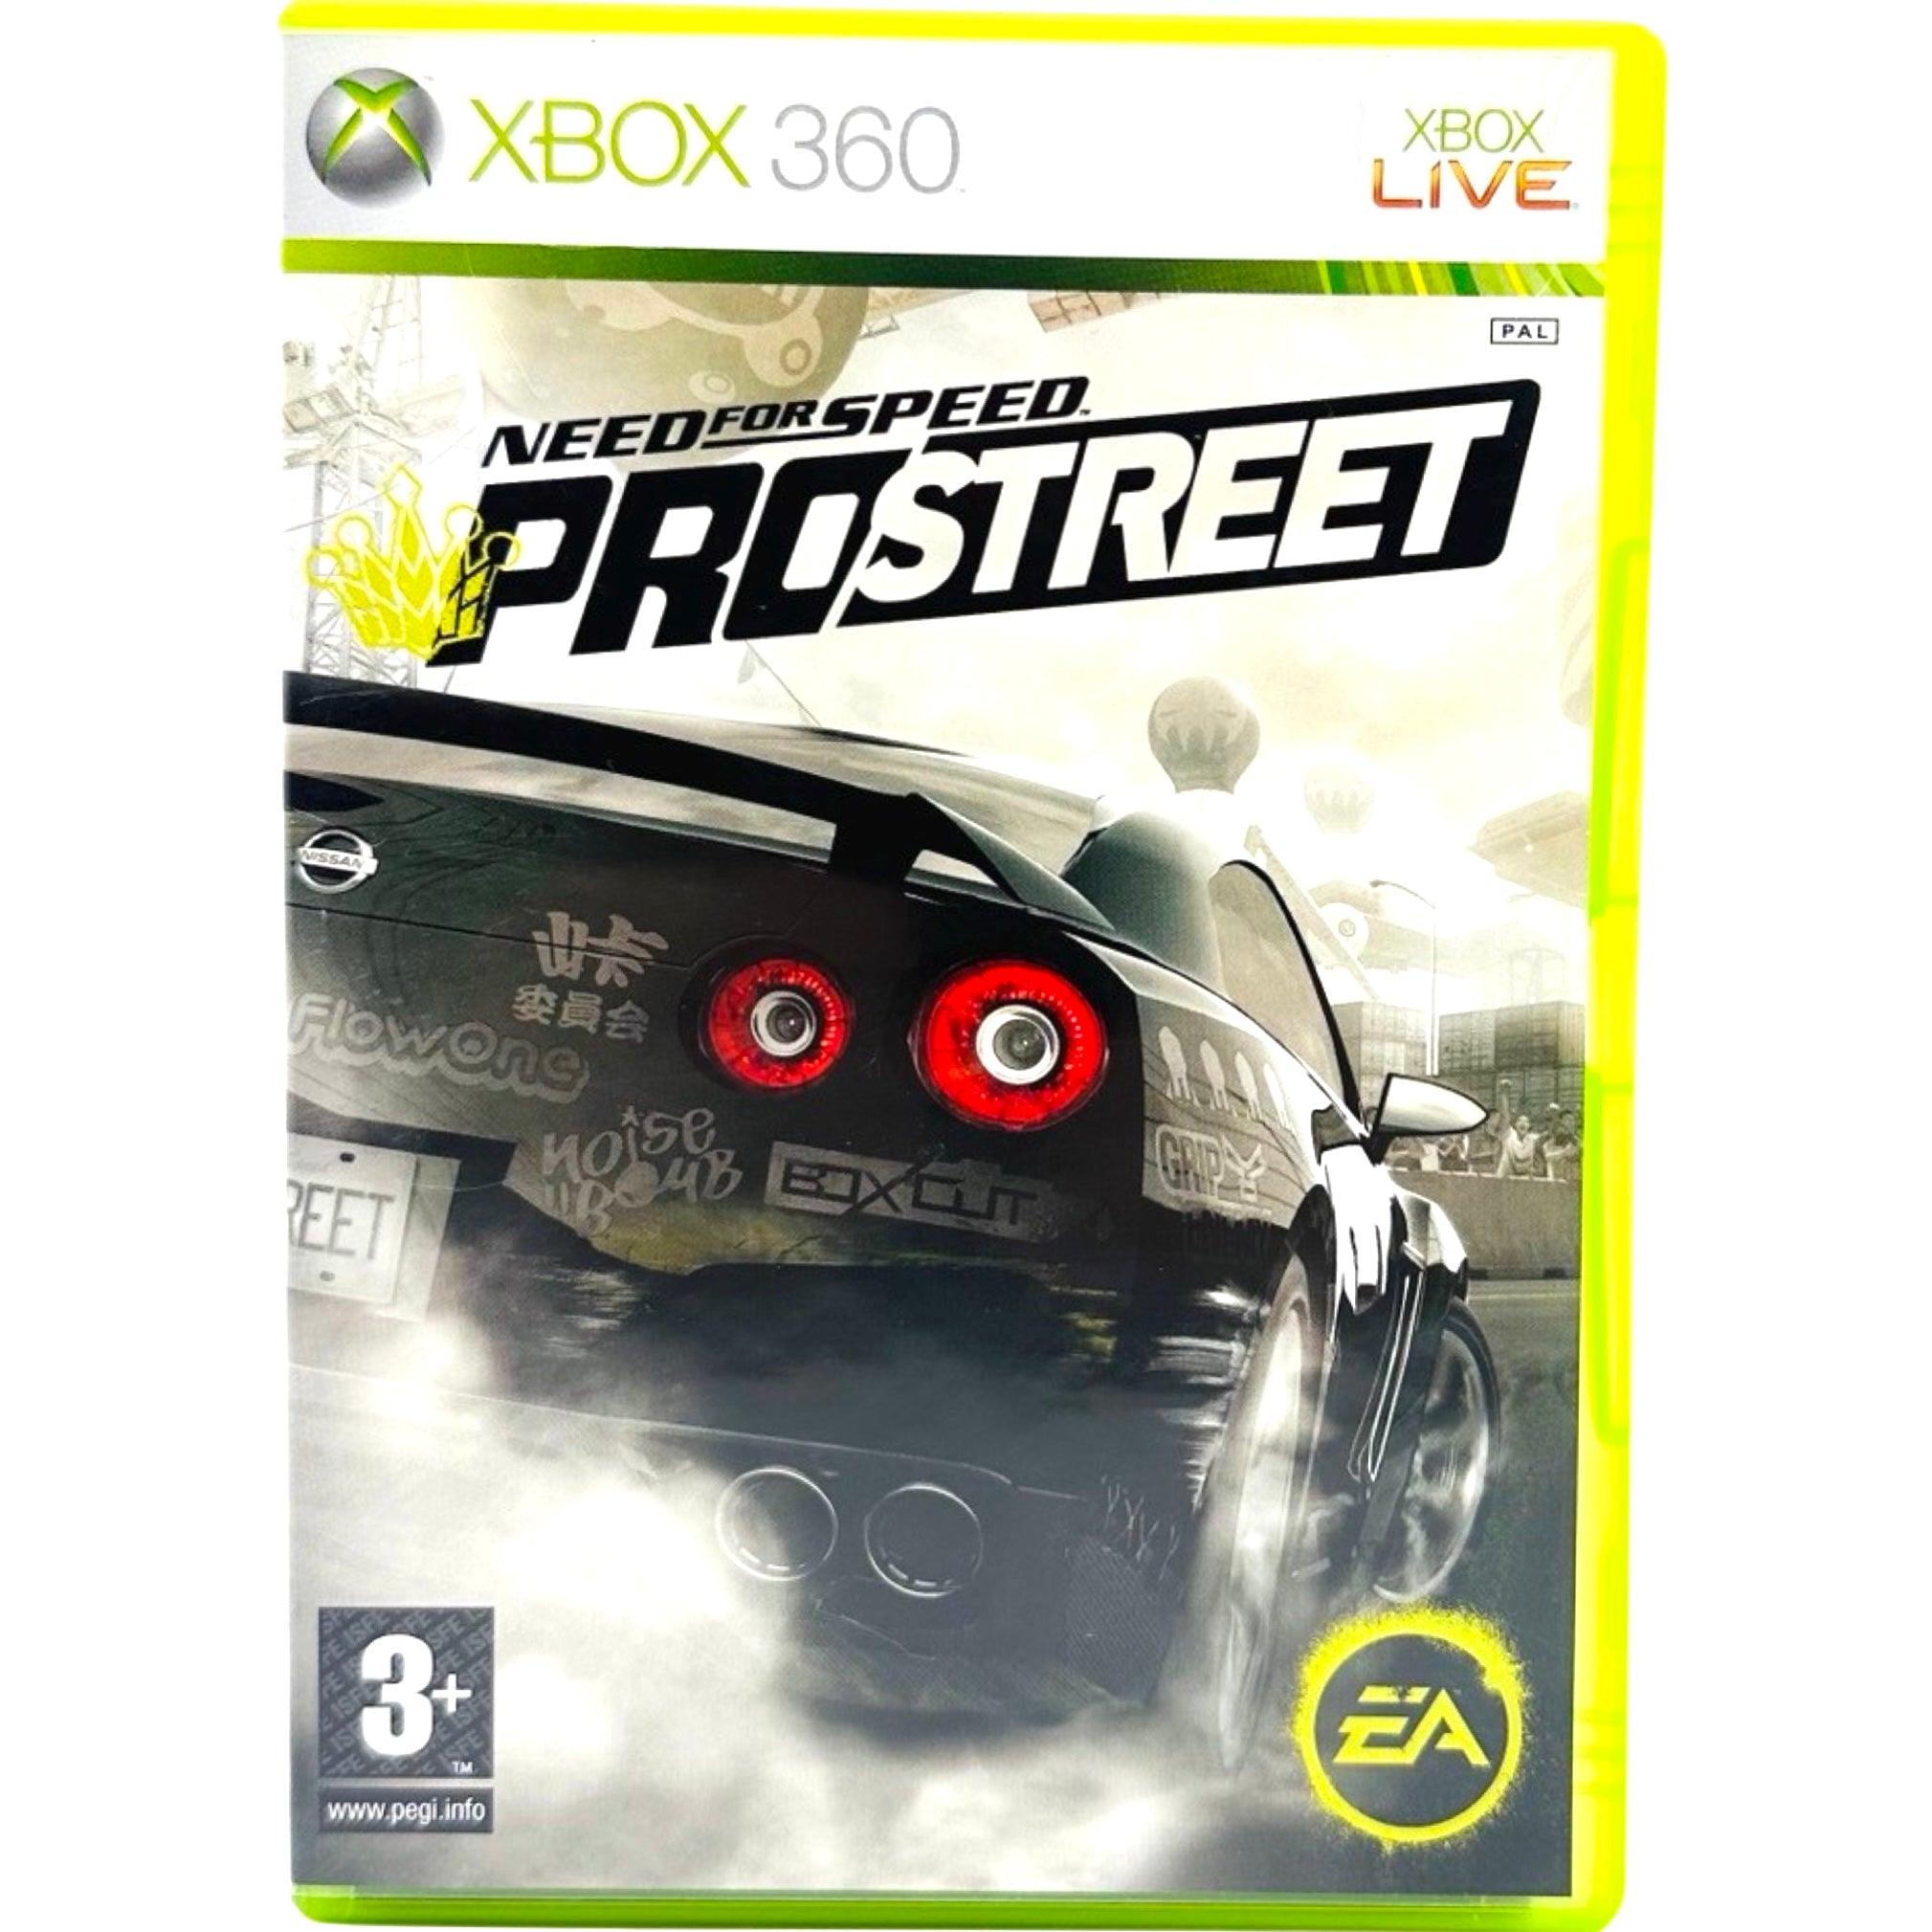 Xbox 360: Need For Speed: ProStreet - RetroGaming.no